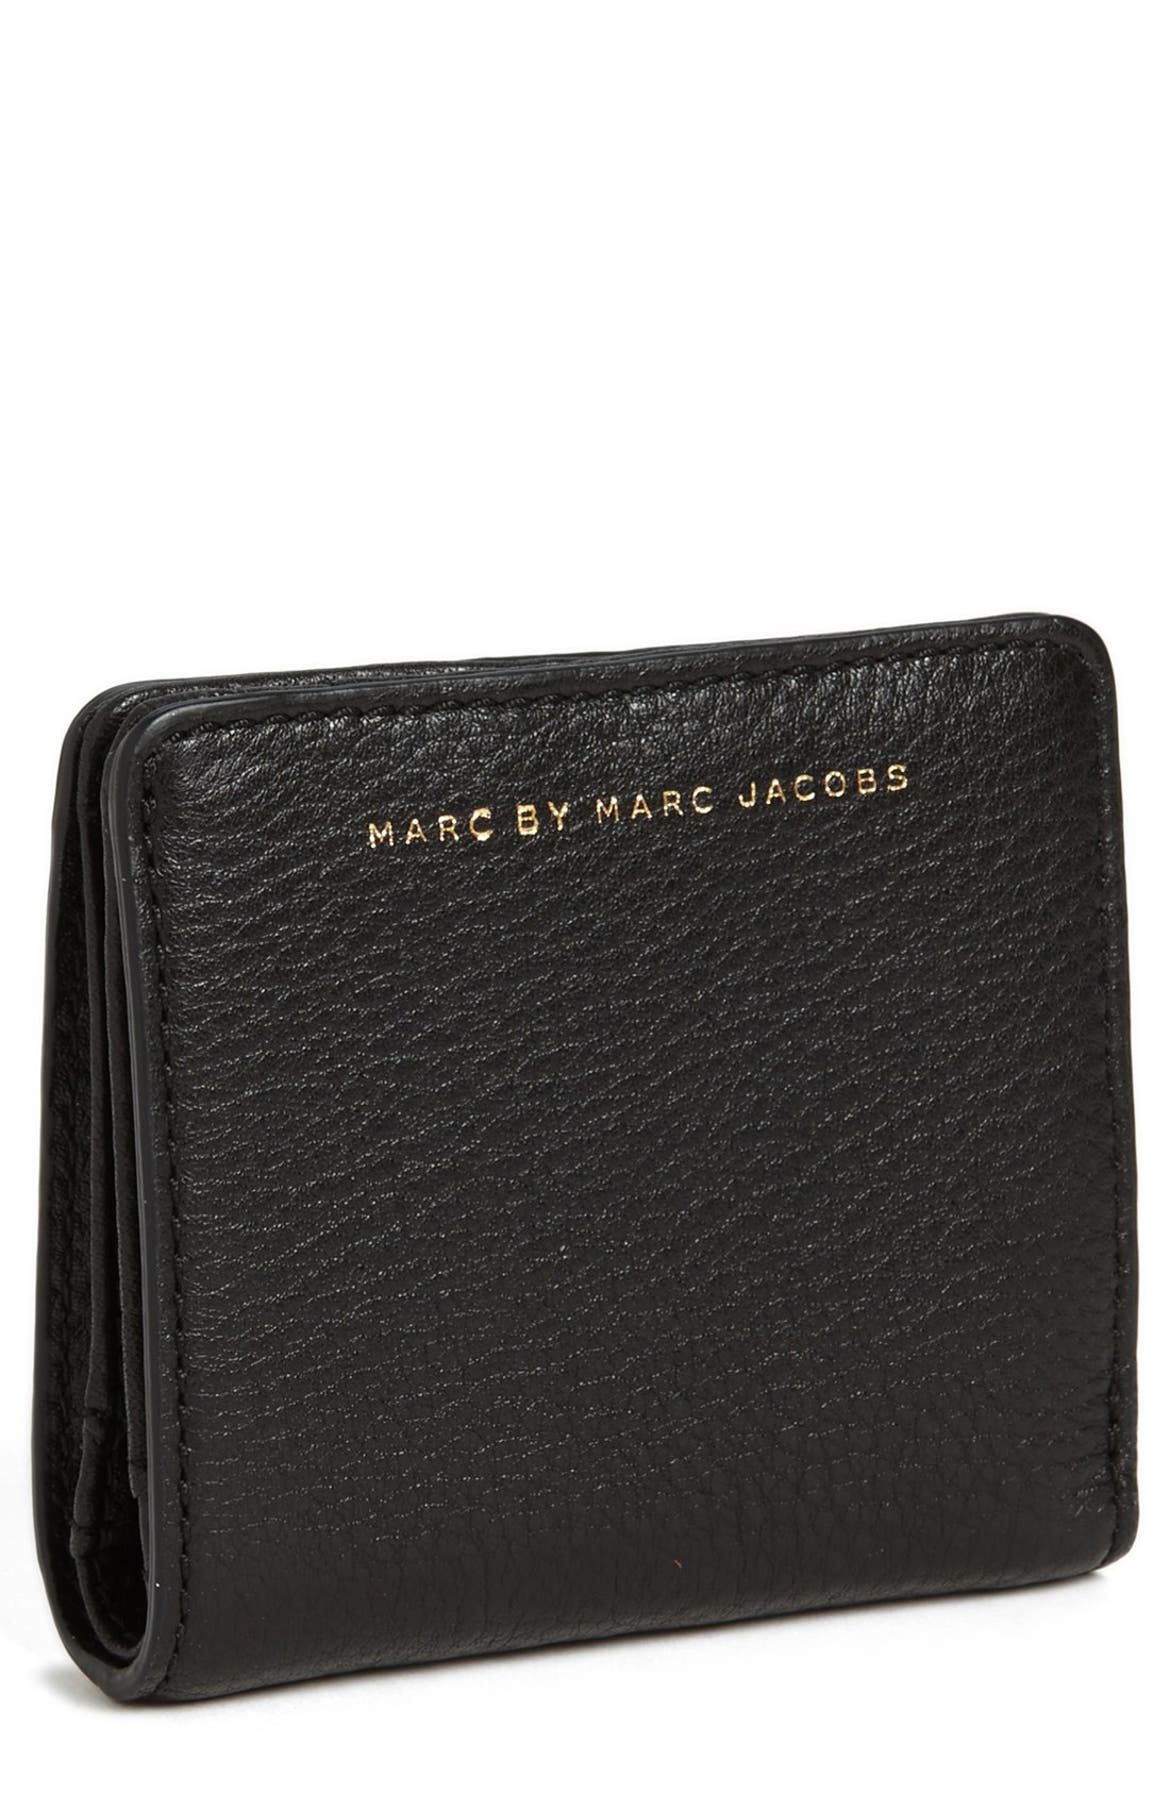 MARC BY MARC JACOBS 'Sophisticato - Single Snap' Wallet | Nordstrom